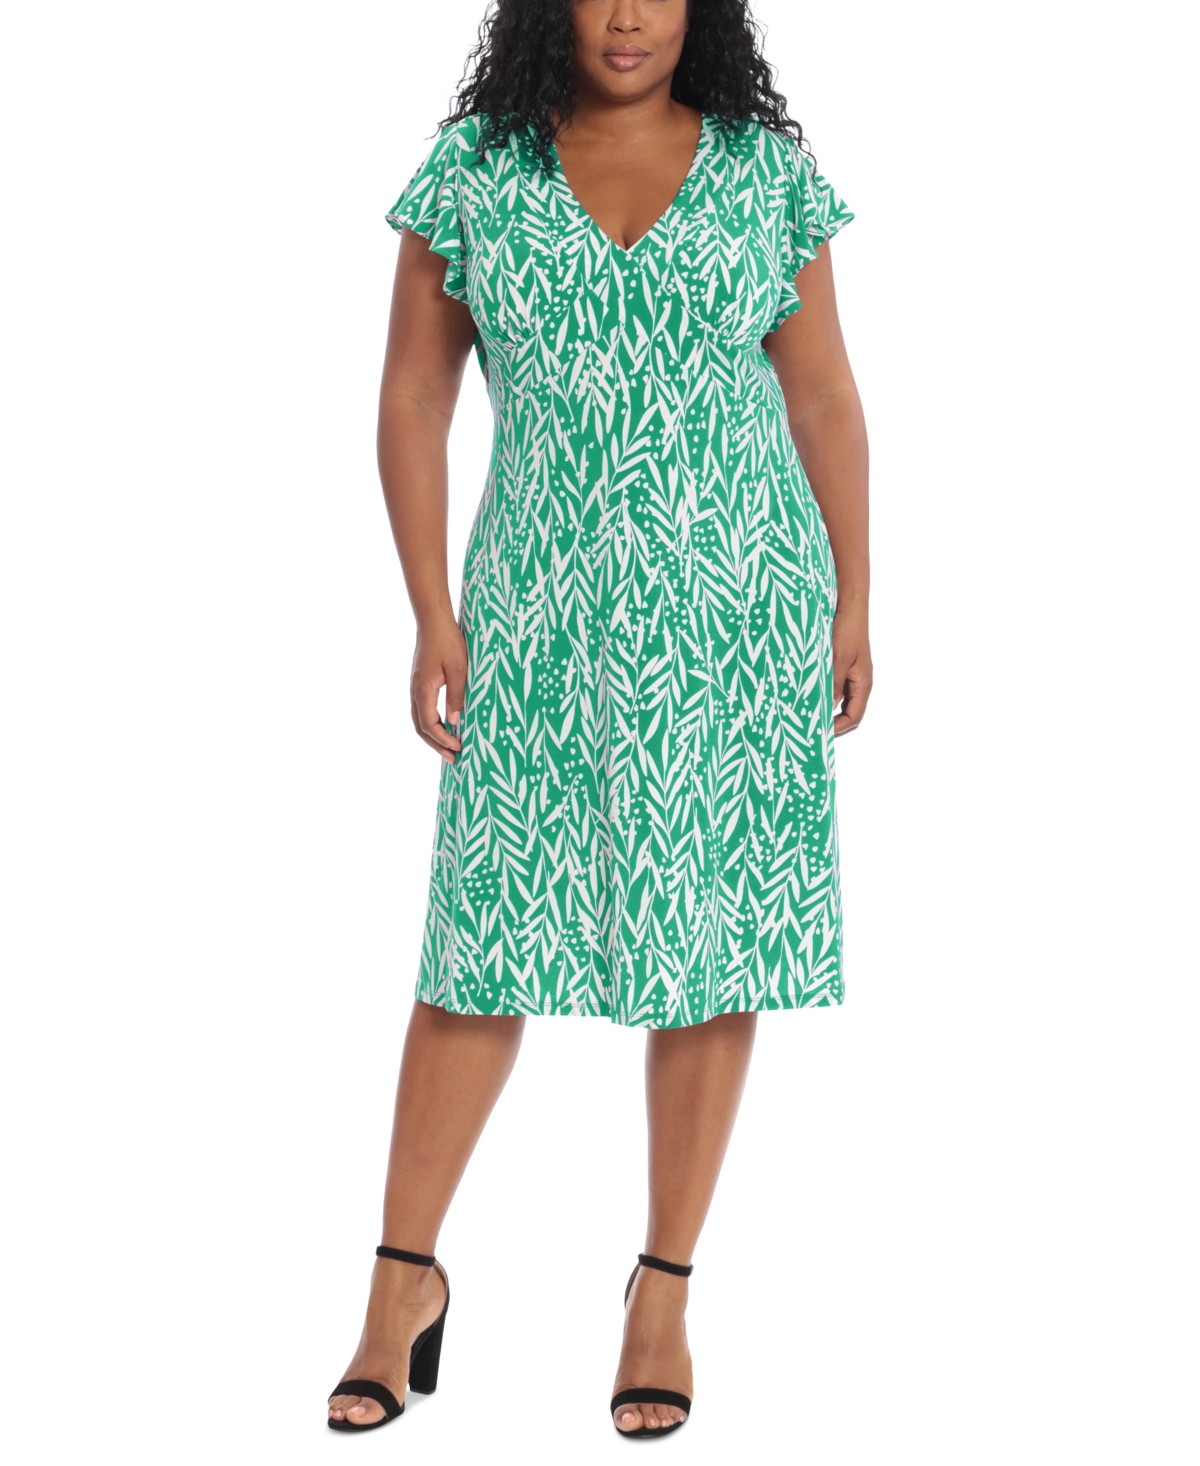 Plus Size Printed Fit & Flare Dress - Green/White